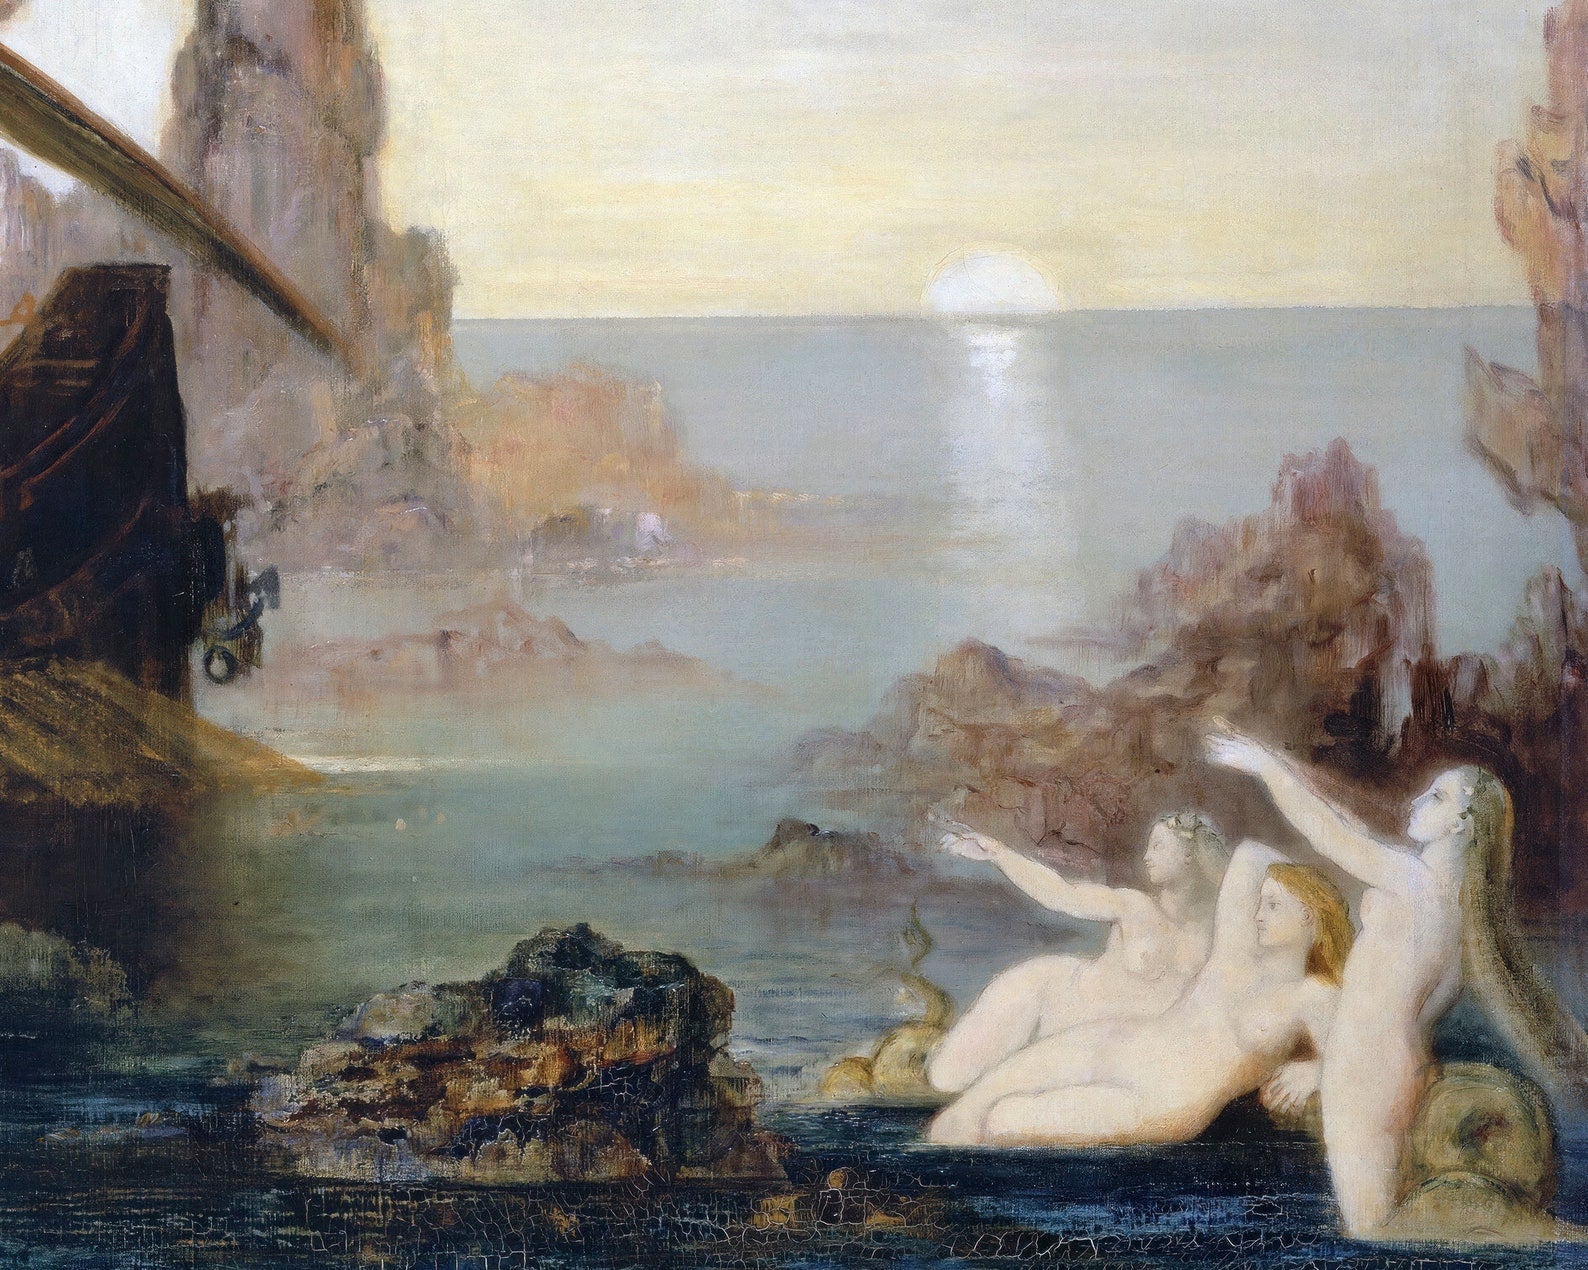 Gustave Moreau "The Sirens" (c.1885) - Mabon Gallery